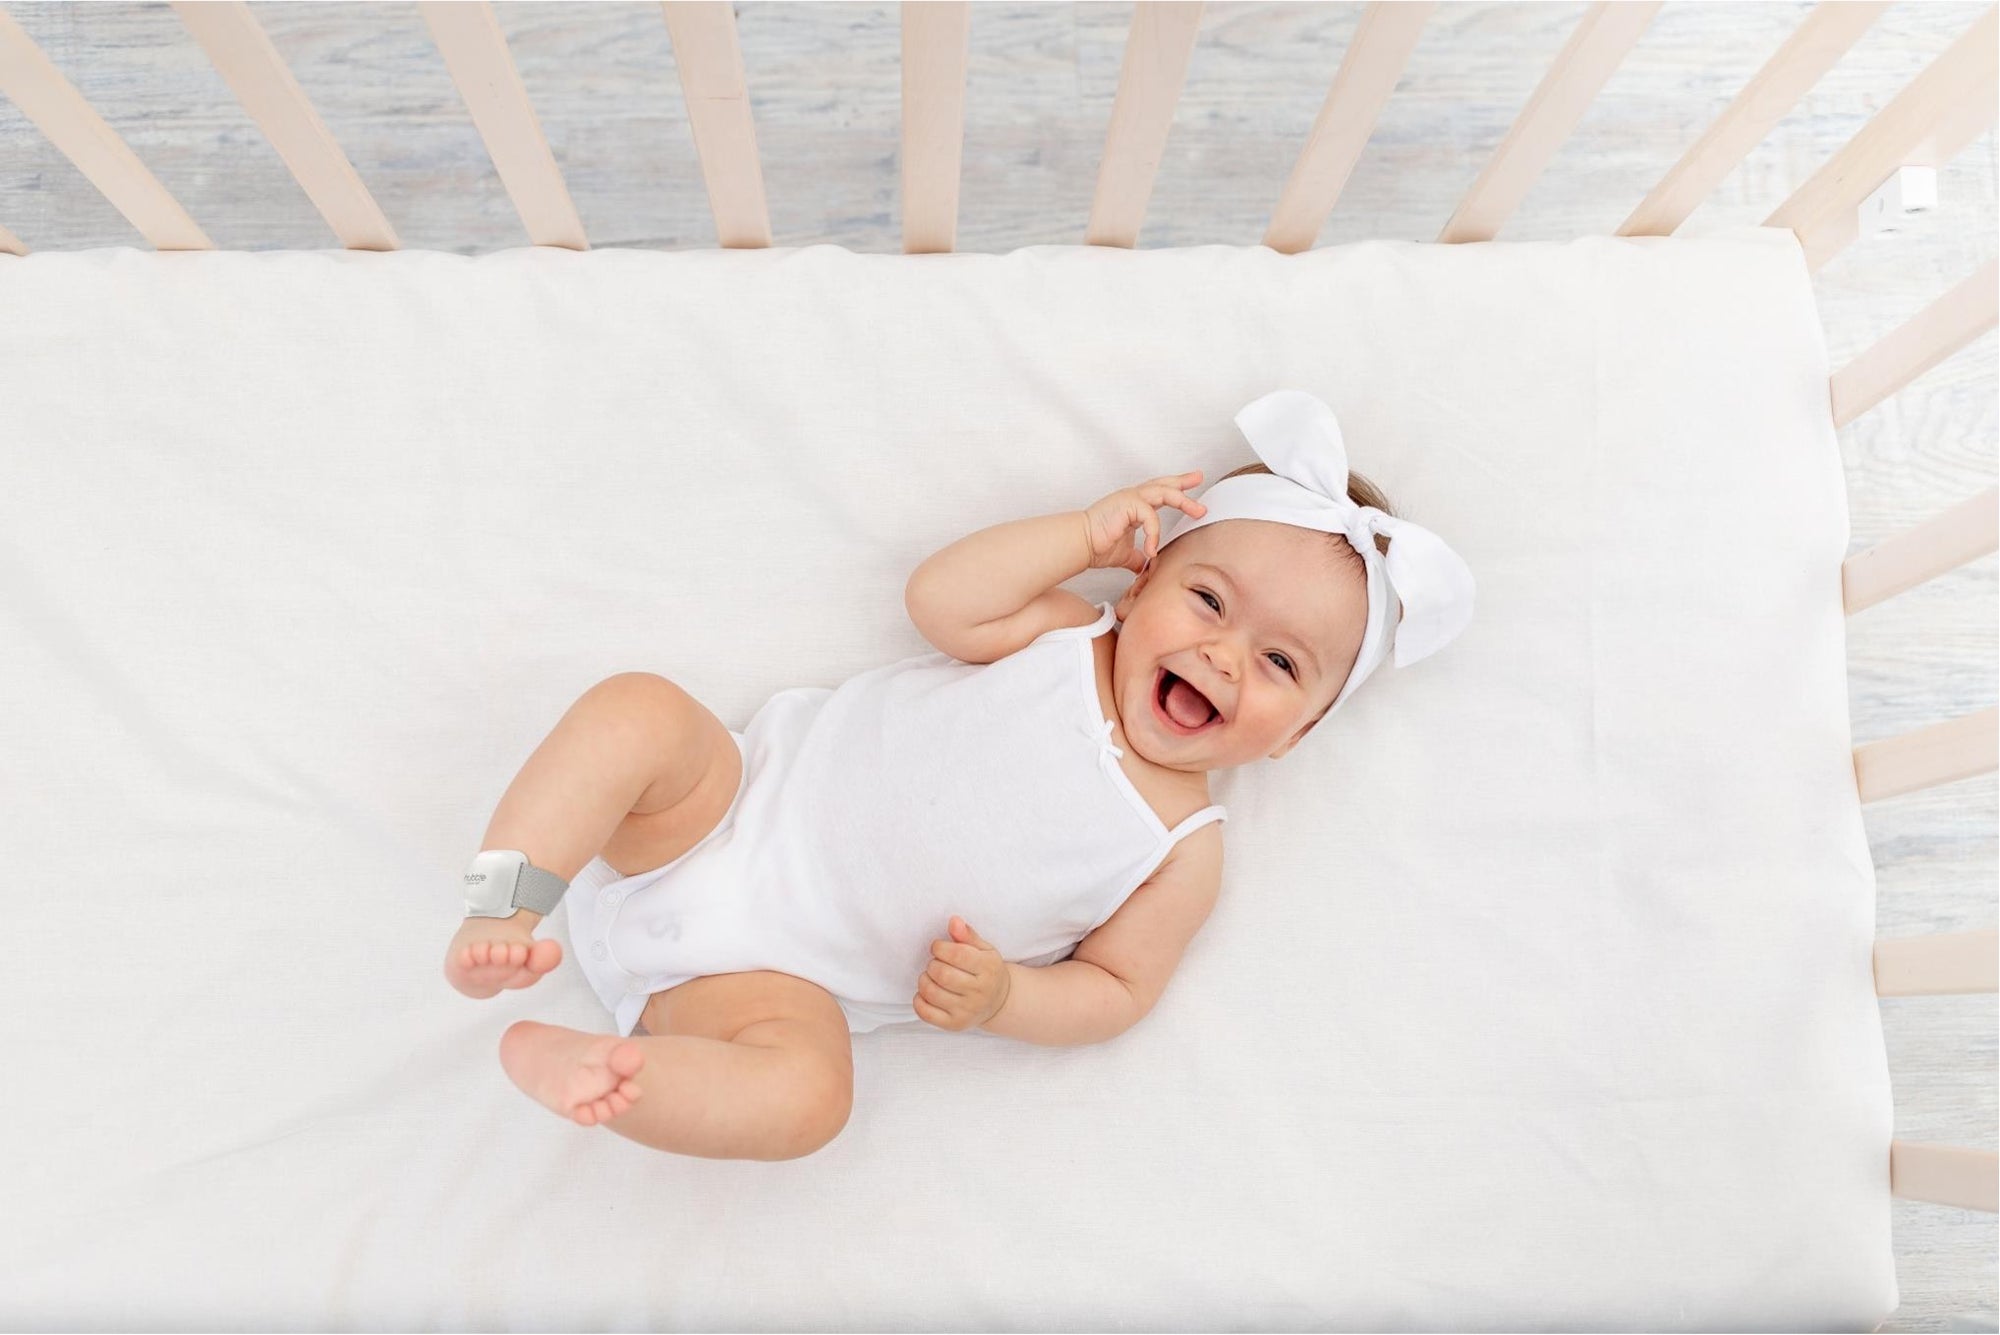 Hubble Connected Focuses on the Importance of Safe Sleep With New Award-Winning Smart Baby Movement Monitor Products